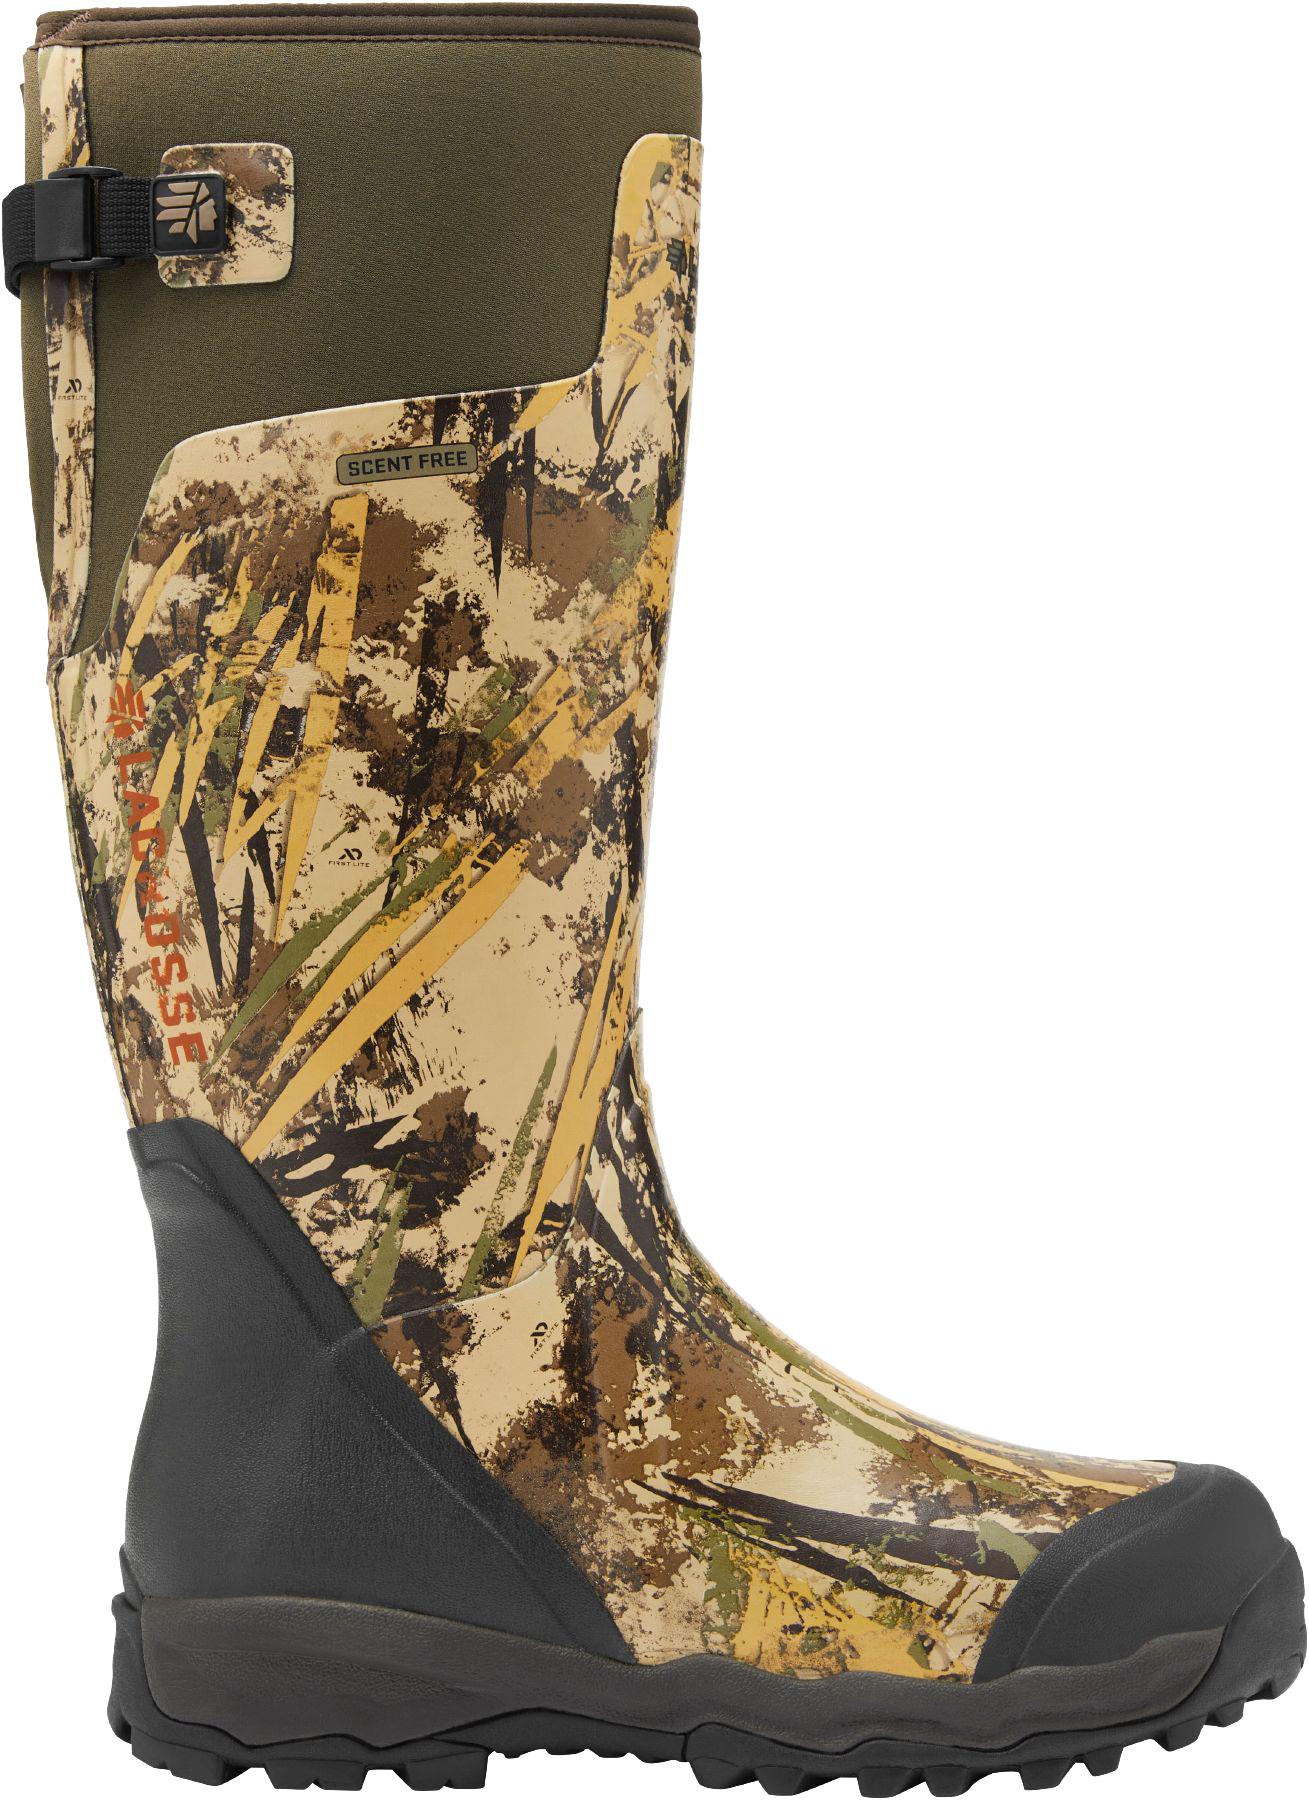 LaCrosse AlphaBurly Pro Hunting Boots for Men - First Lite Typha - 6M